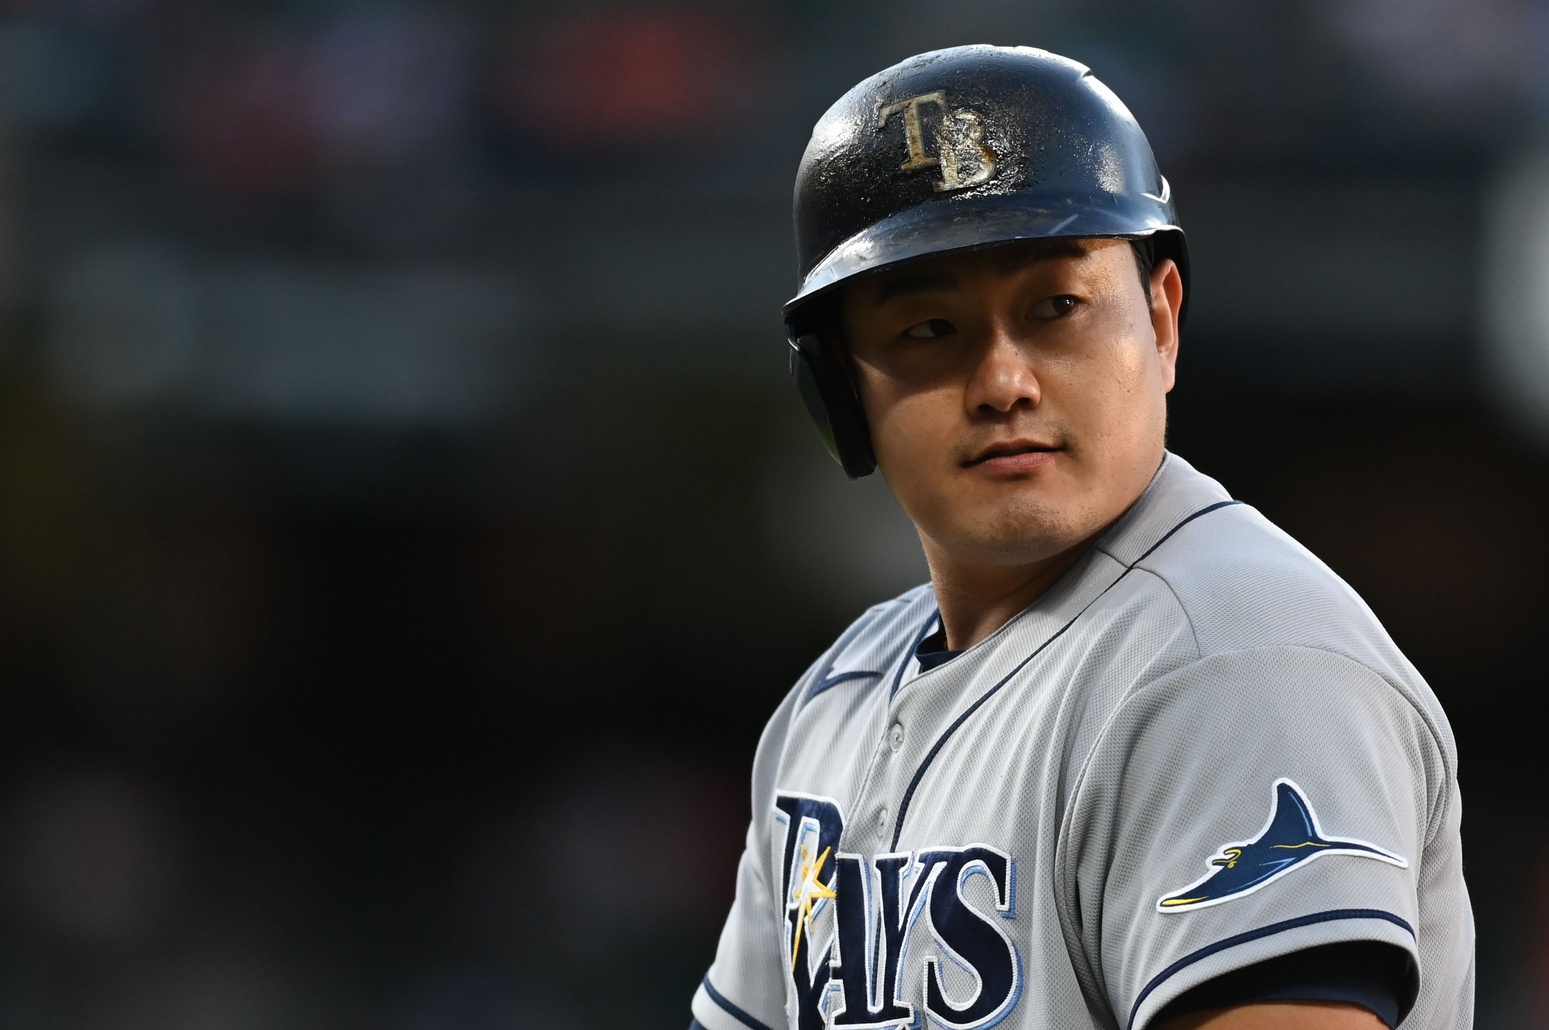 Los Angeles Angels vs Tampa Bay Rays Prediction, 8/23/2022 MLB Picks, Best Bets & Odds